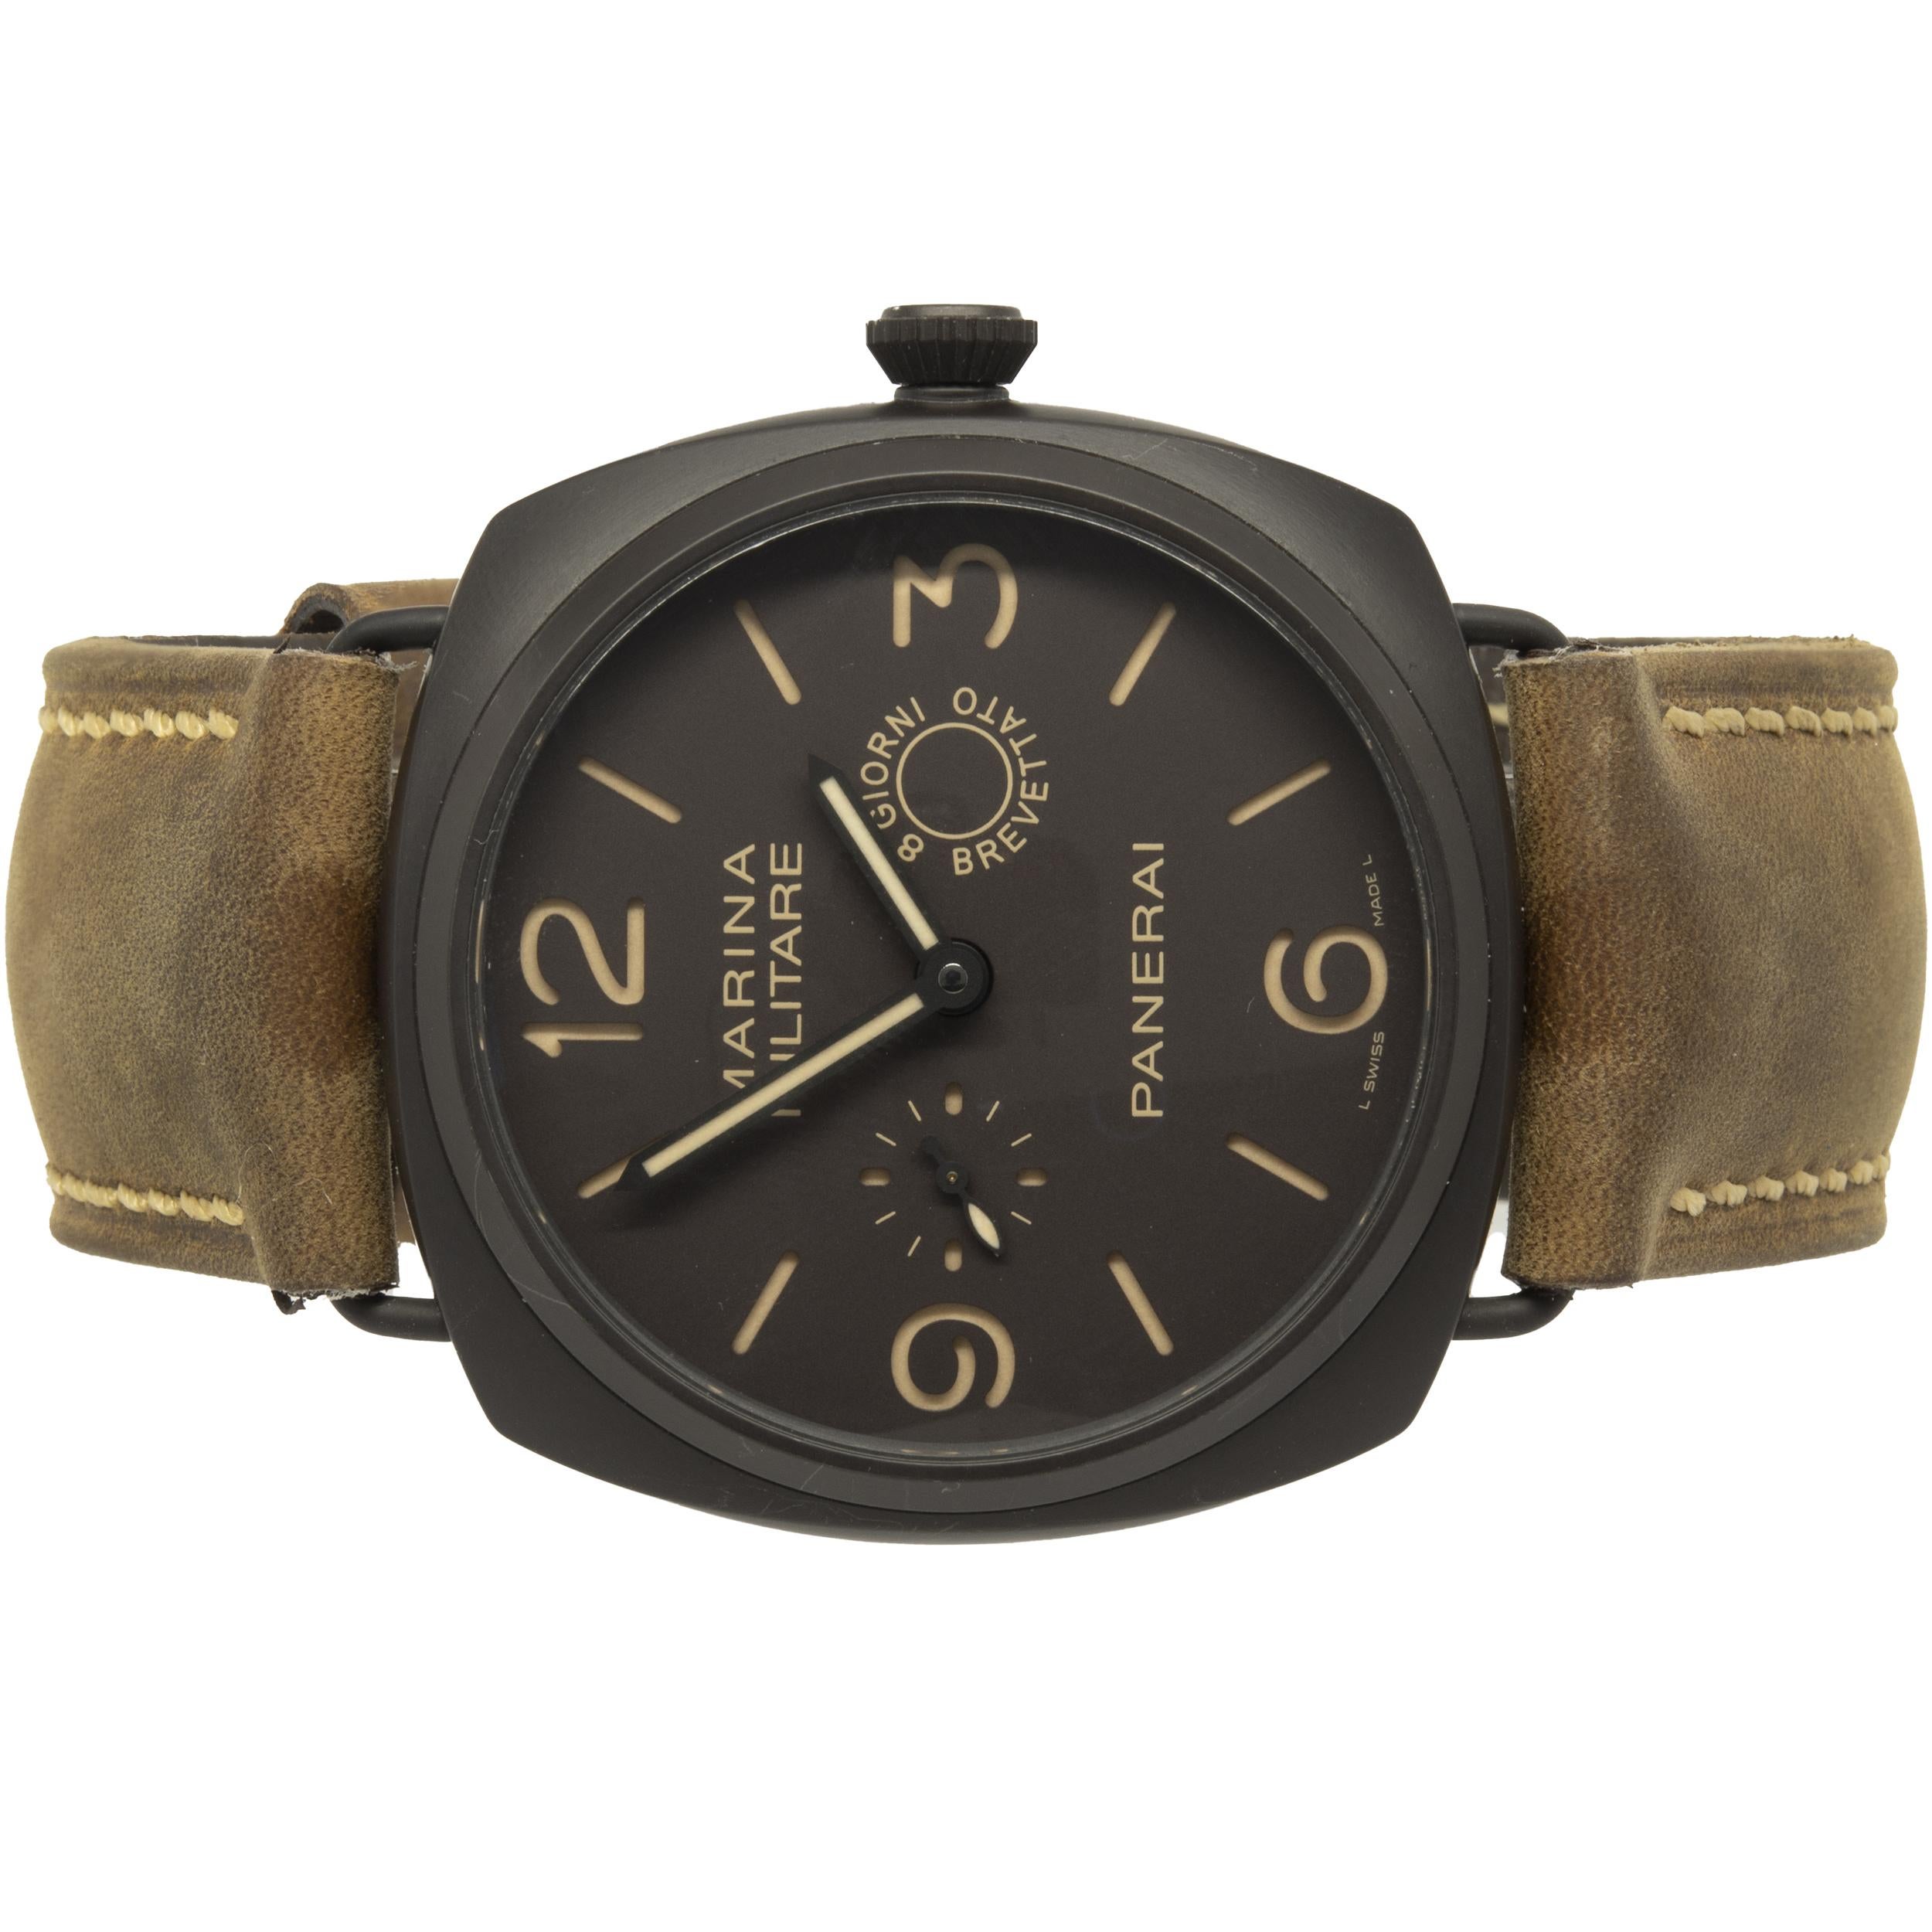 Movement: manual
Function: hour, minute, small seconds, 8 day power reserve
Case: 47mm black ceramic case, sapphire crystal, smooth bezel, push-pull crown
Band: brown leather strap,  black ceramic buckle
Dial: tobacco dial, Arabic/stick
Reference: